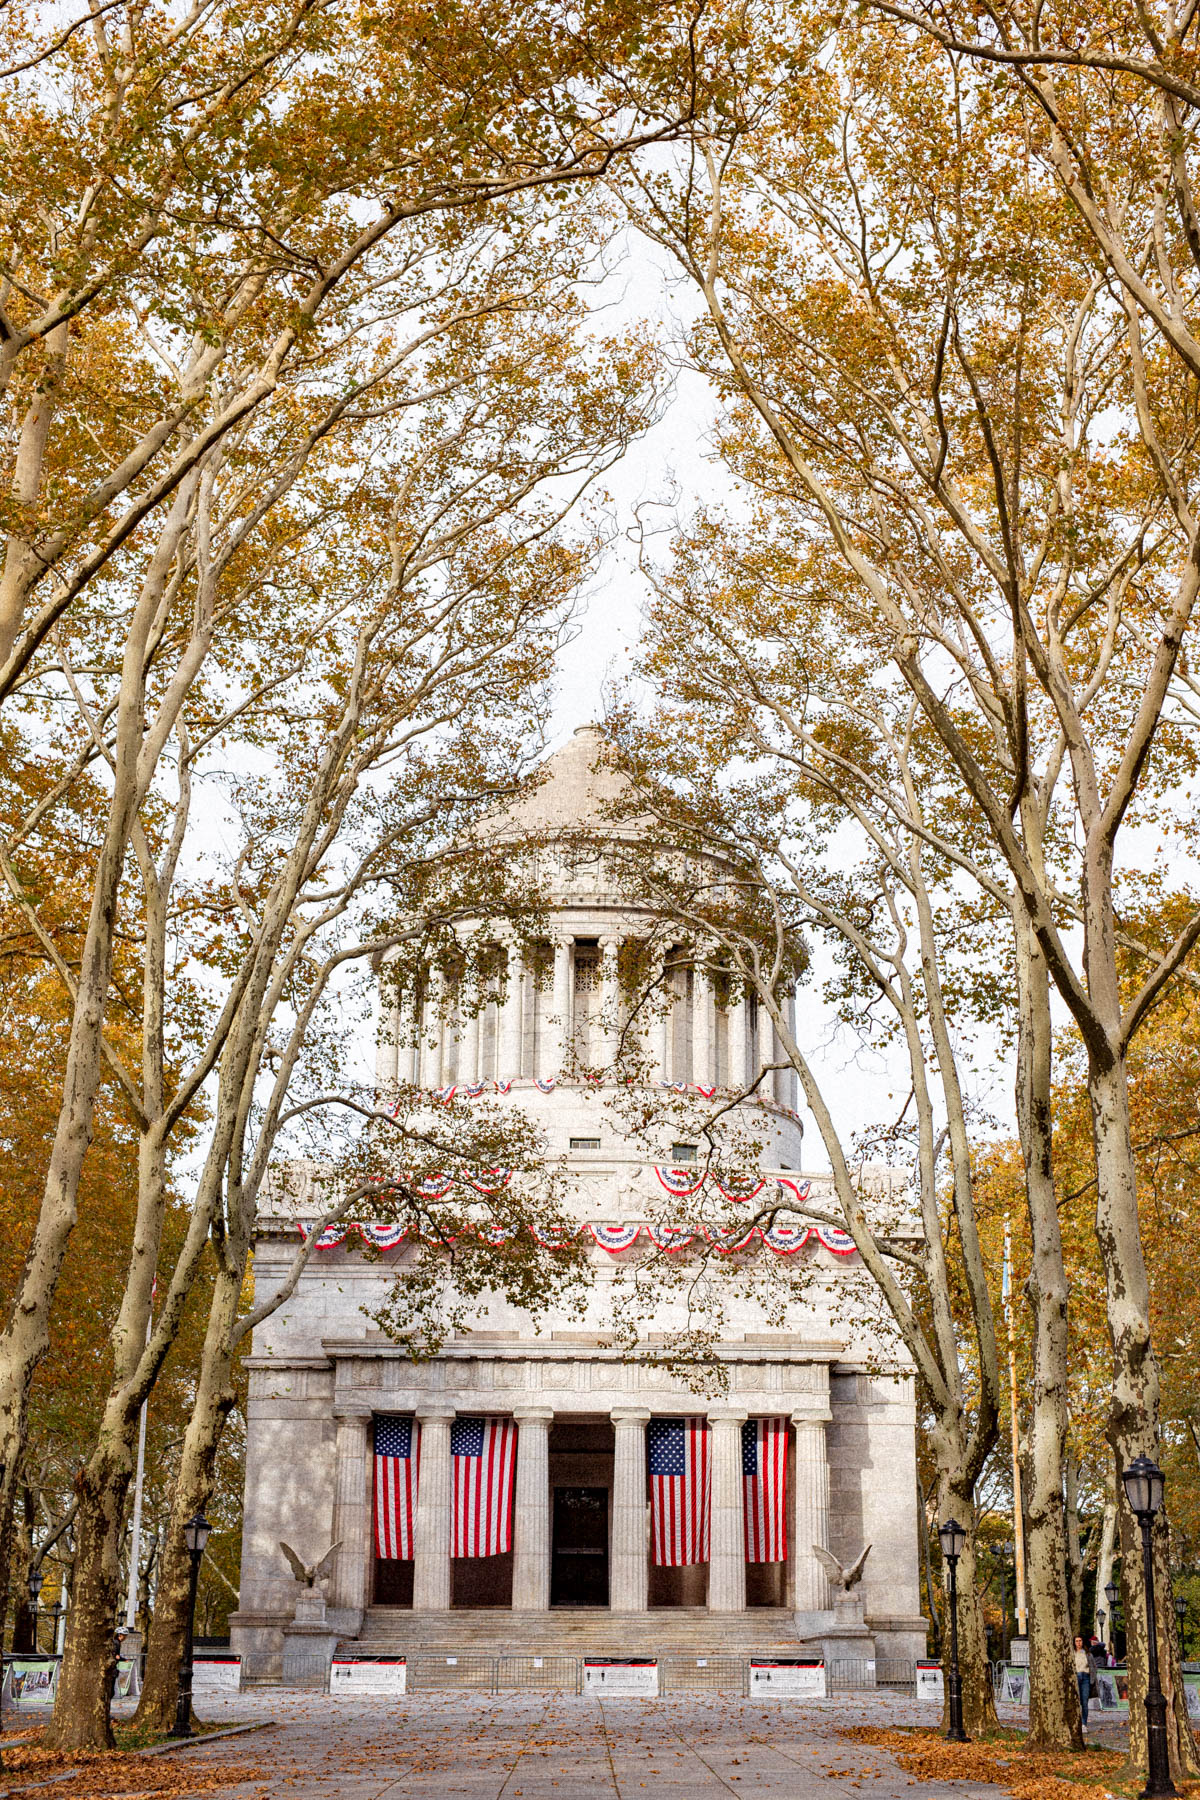 Free things to do in NYC, visit Grant's Tomb